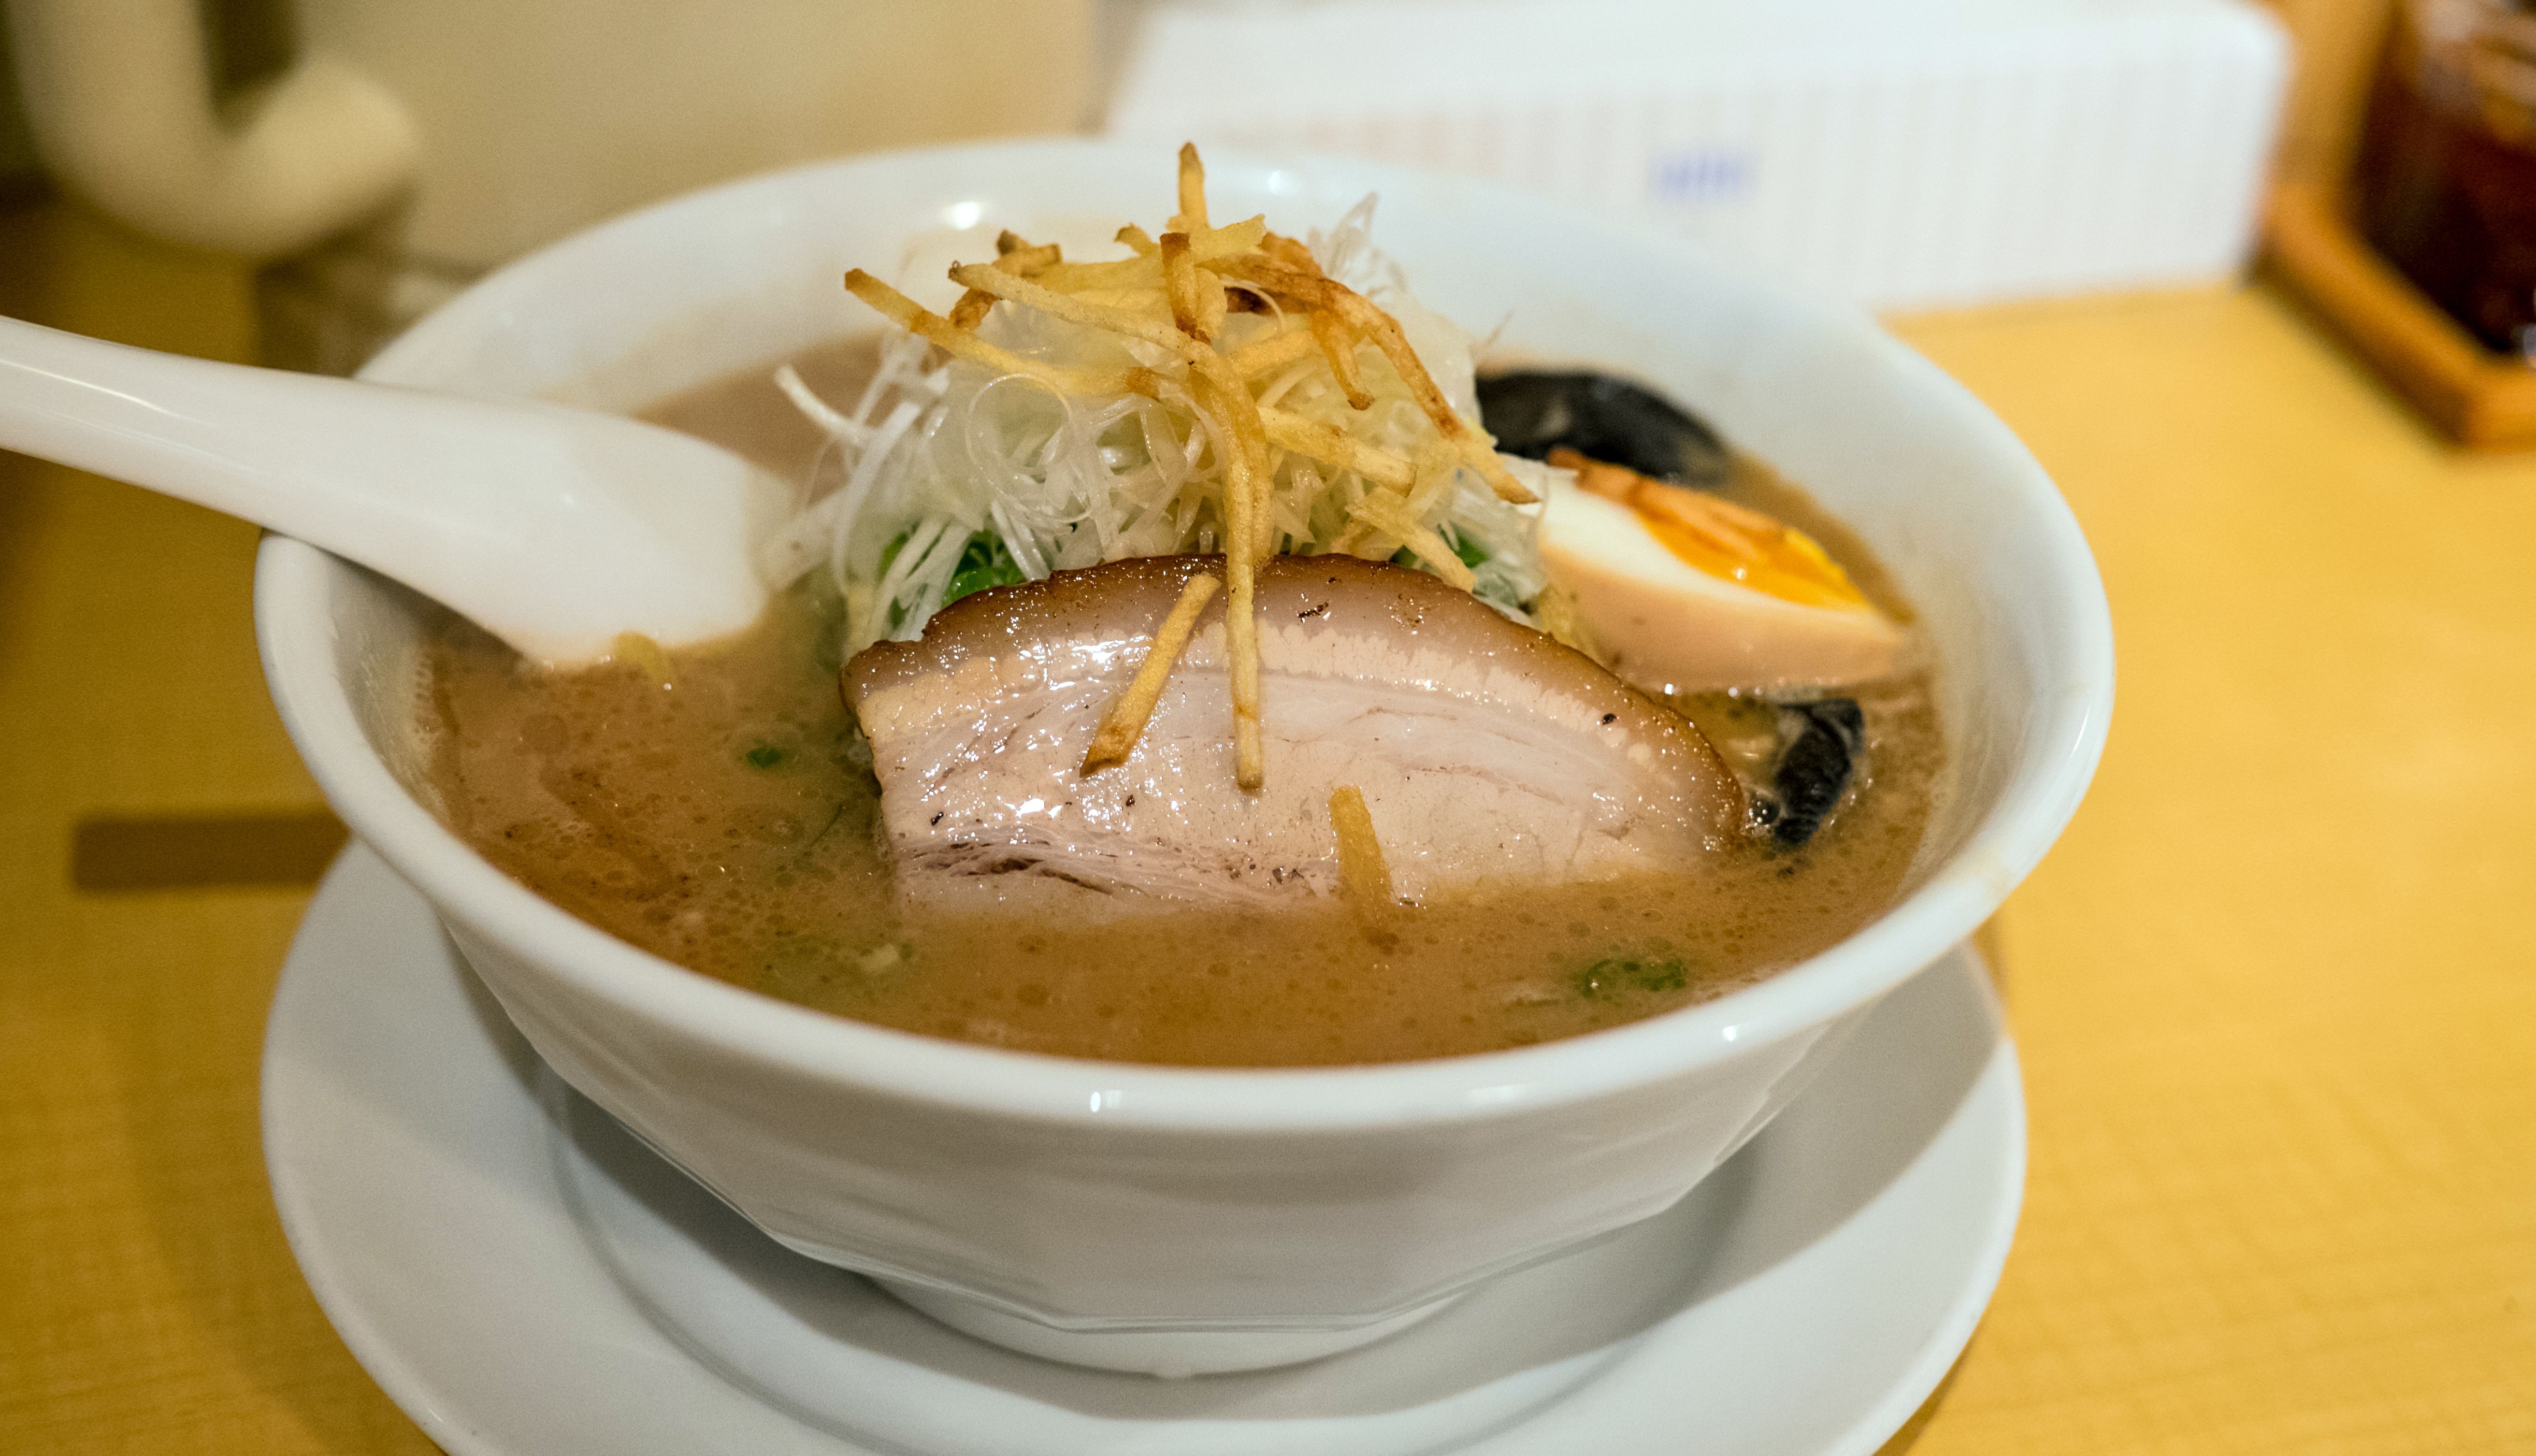 Narutomaki: The Unmissable Ramen Topping!